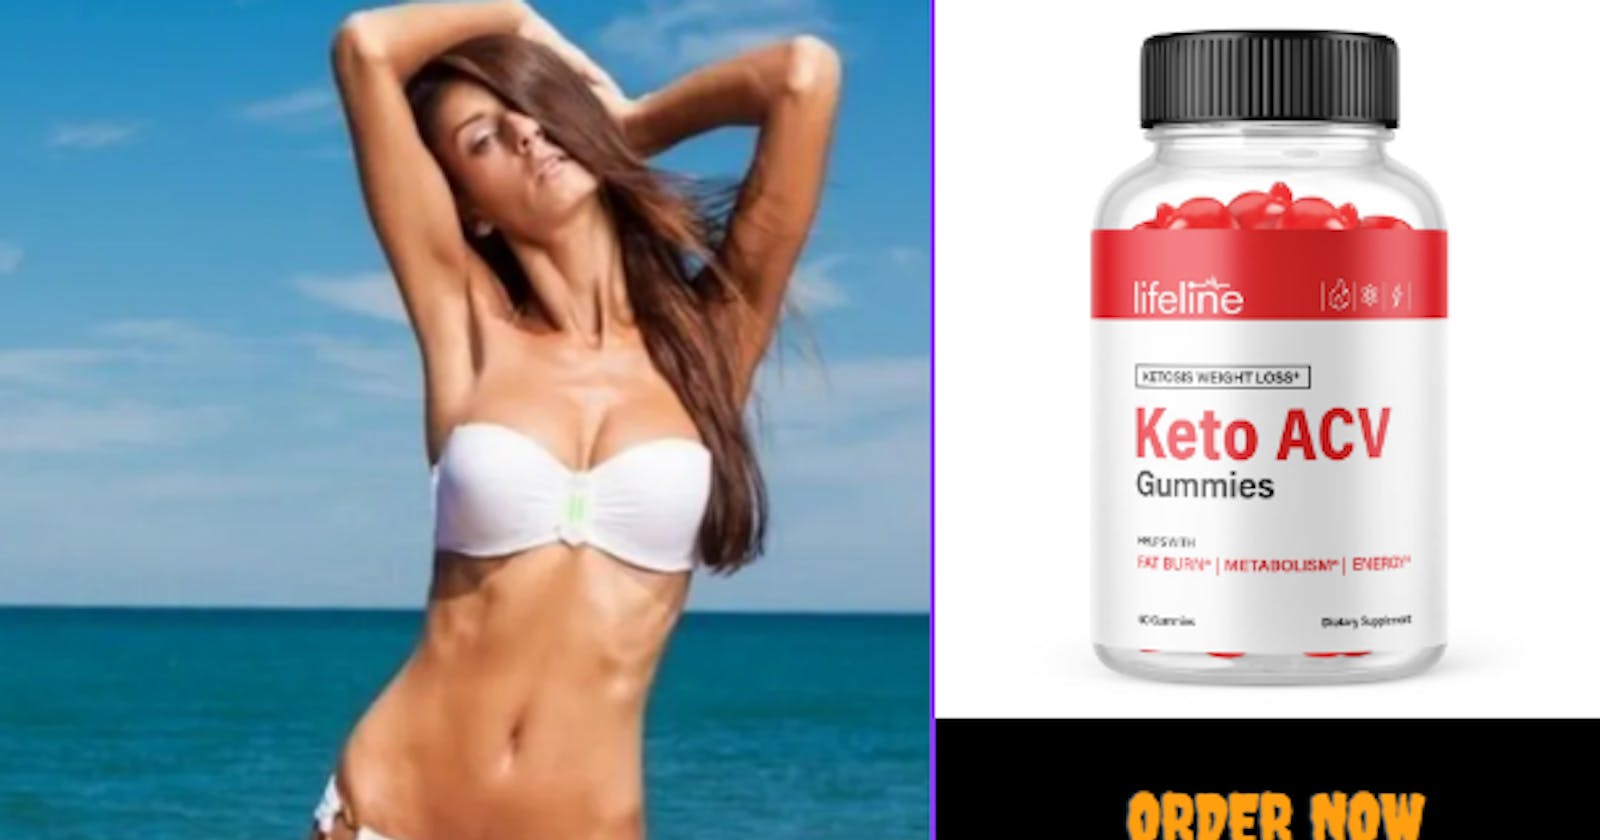 Lifeline Keto ACV Gummies US Review - Easy Way Weight Loss!